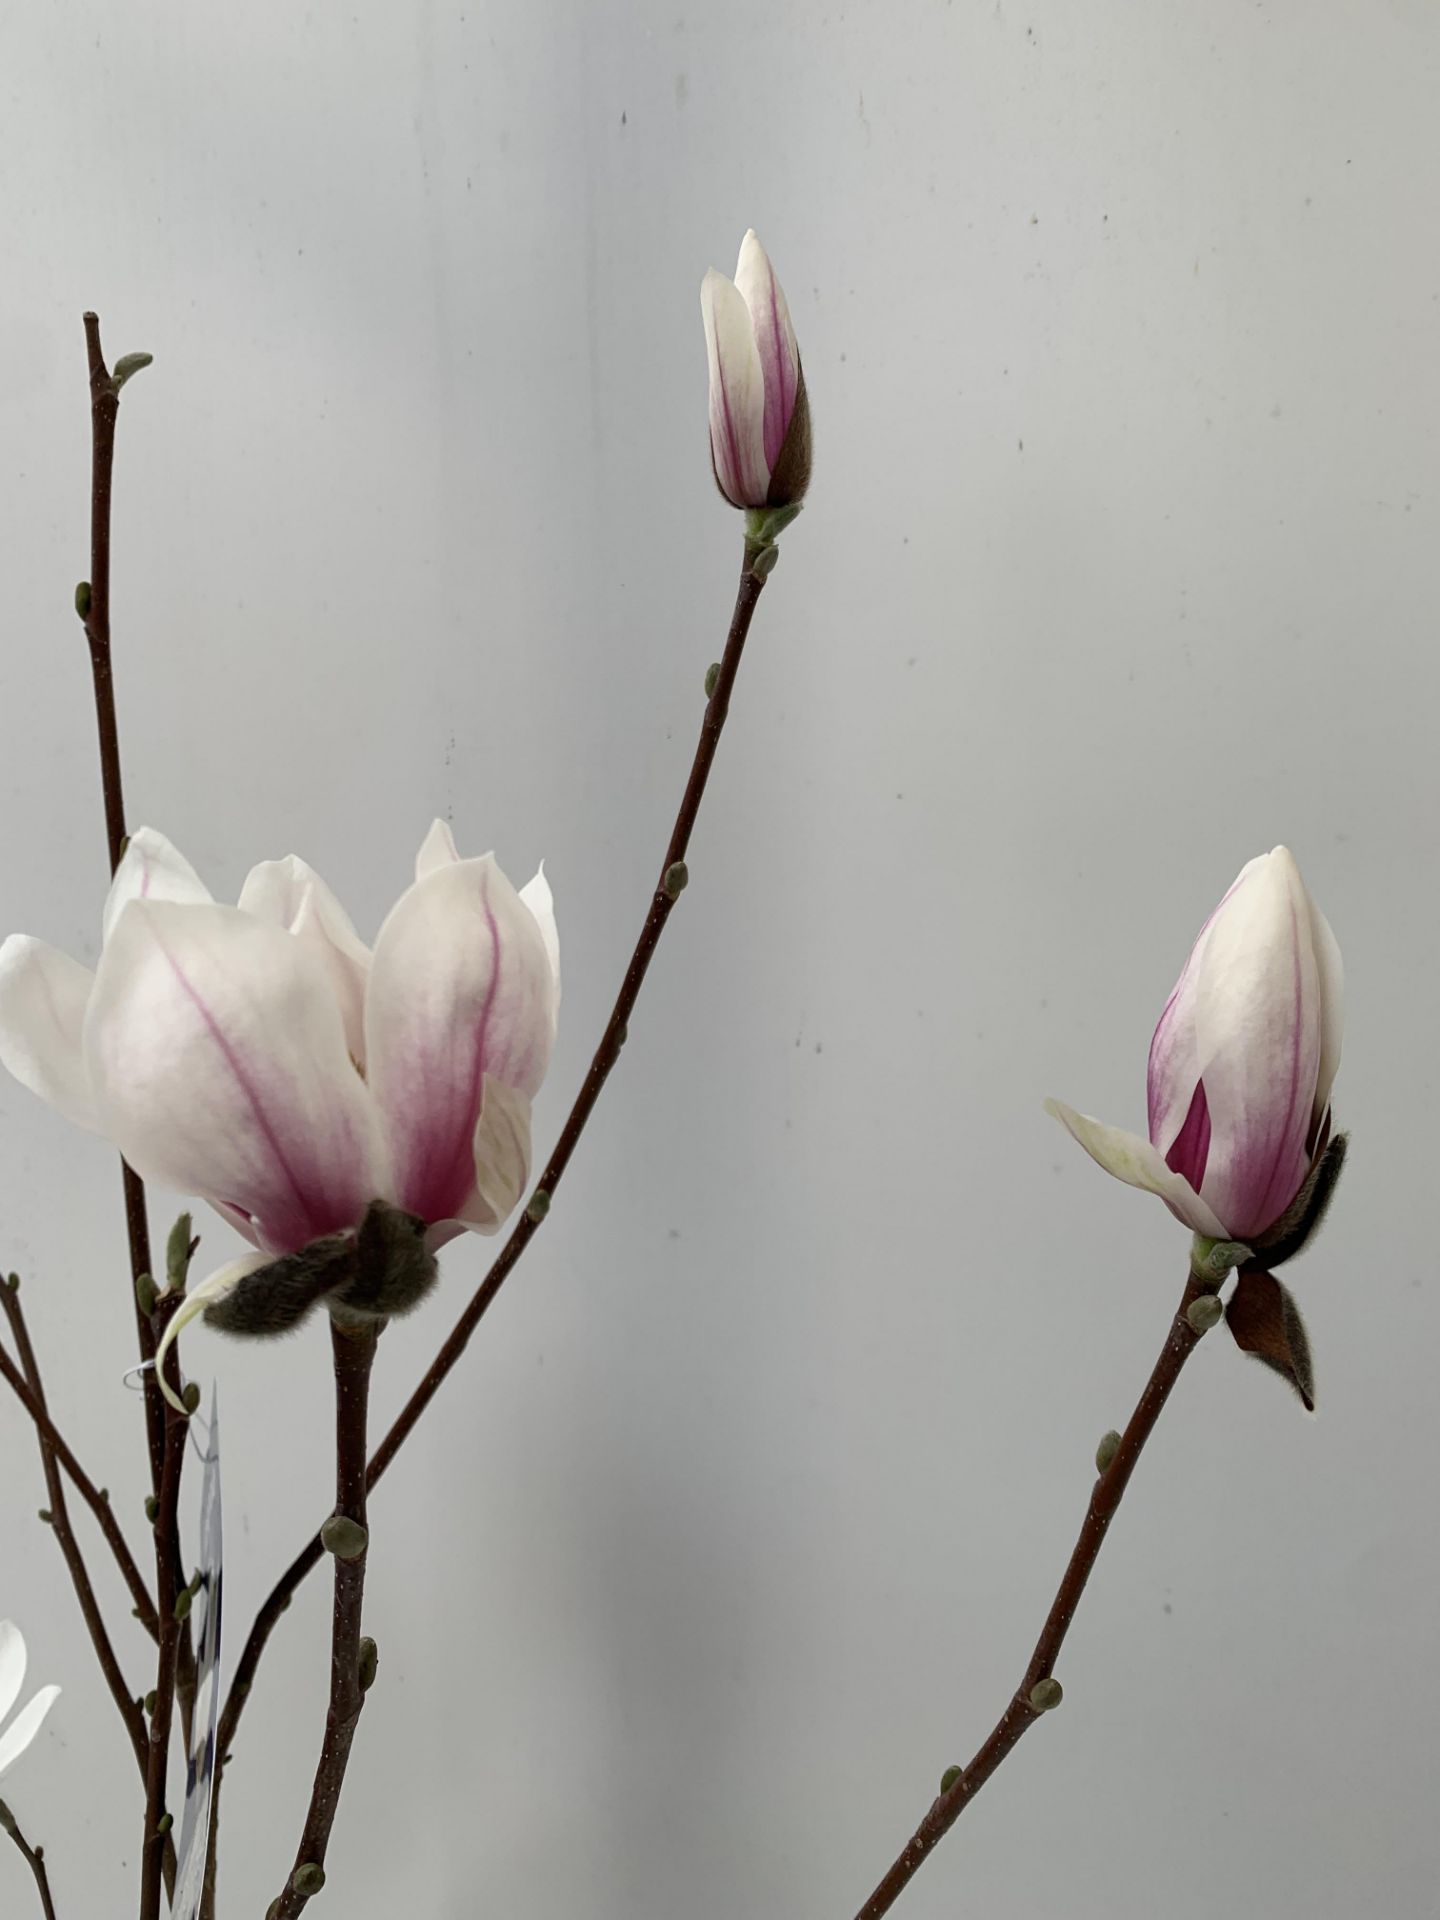 ONE MAGNOLIA SOULANGEANA 'SUPERBA' APPROX 120CM IN HEIGHT IN A 7 LTR POT PLUS VAT - Image 7 of 14